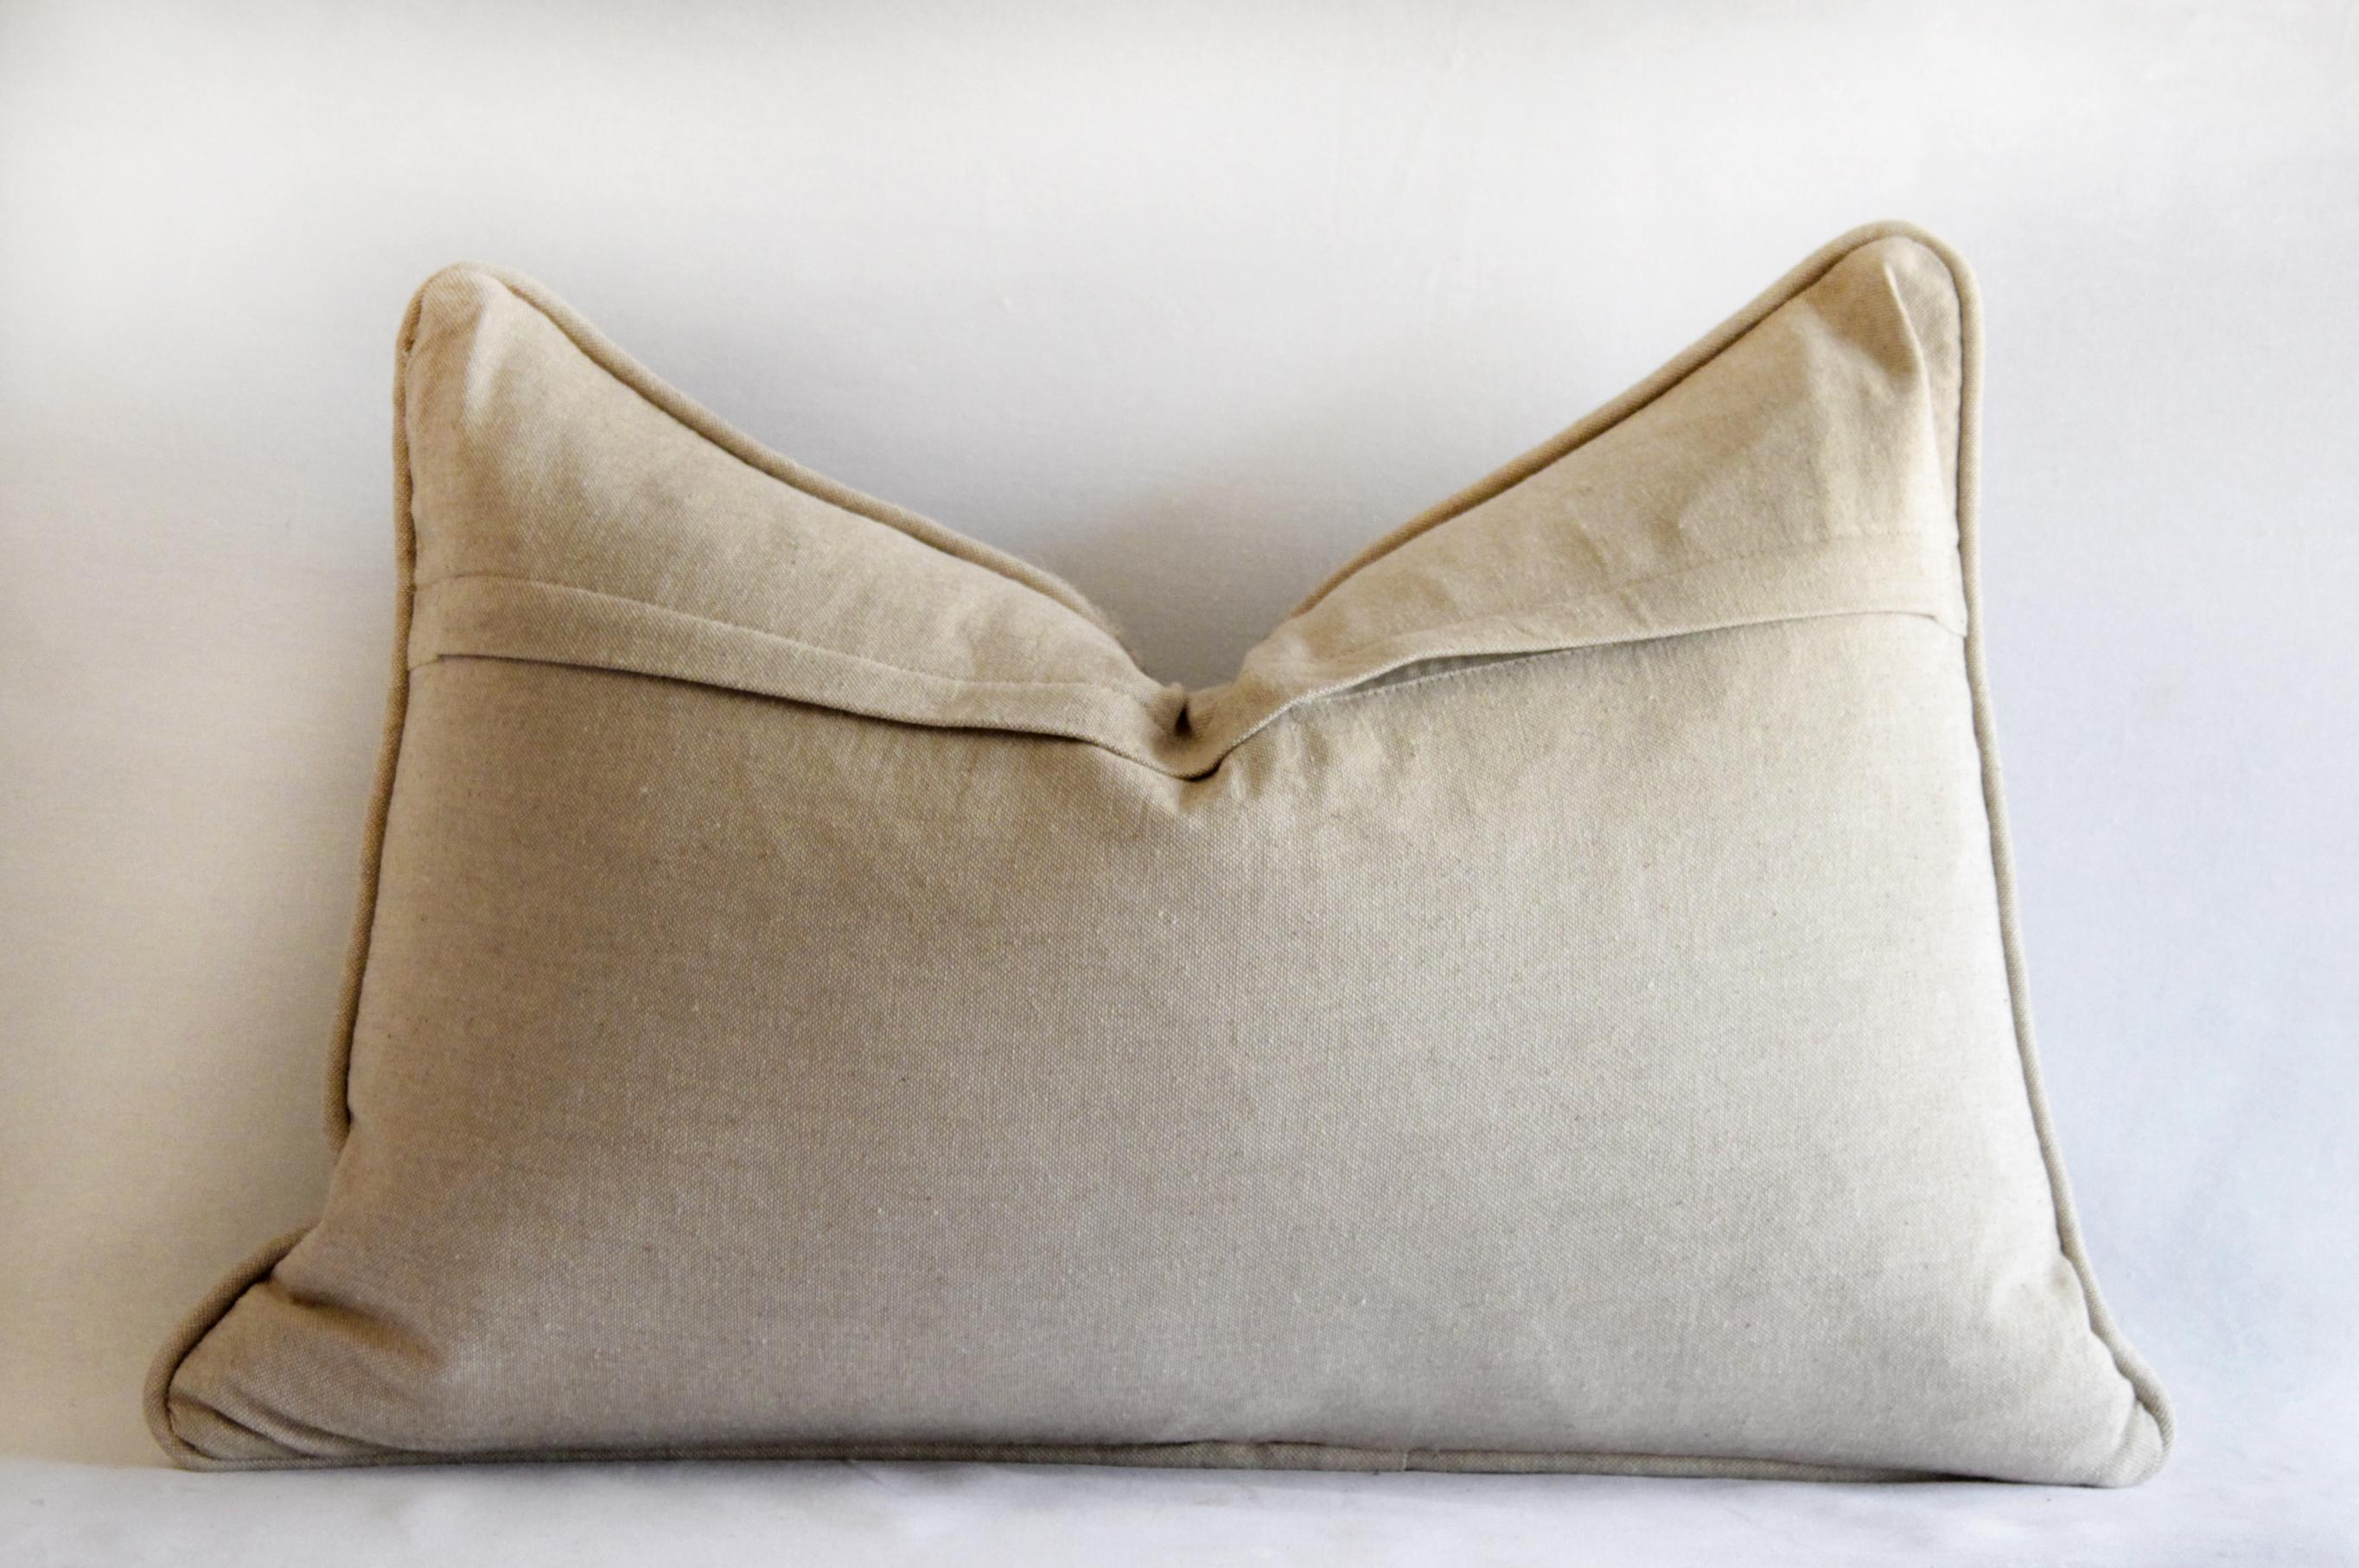 Printed Wool Lumbar Pillows in Tan and Charcoal Stripes 2